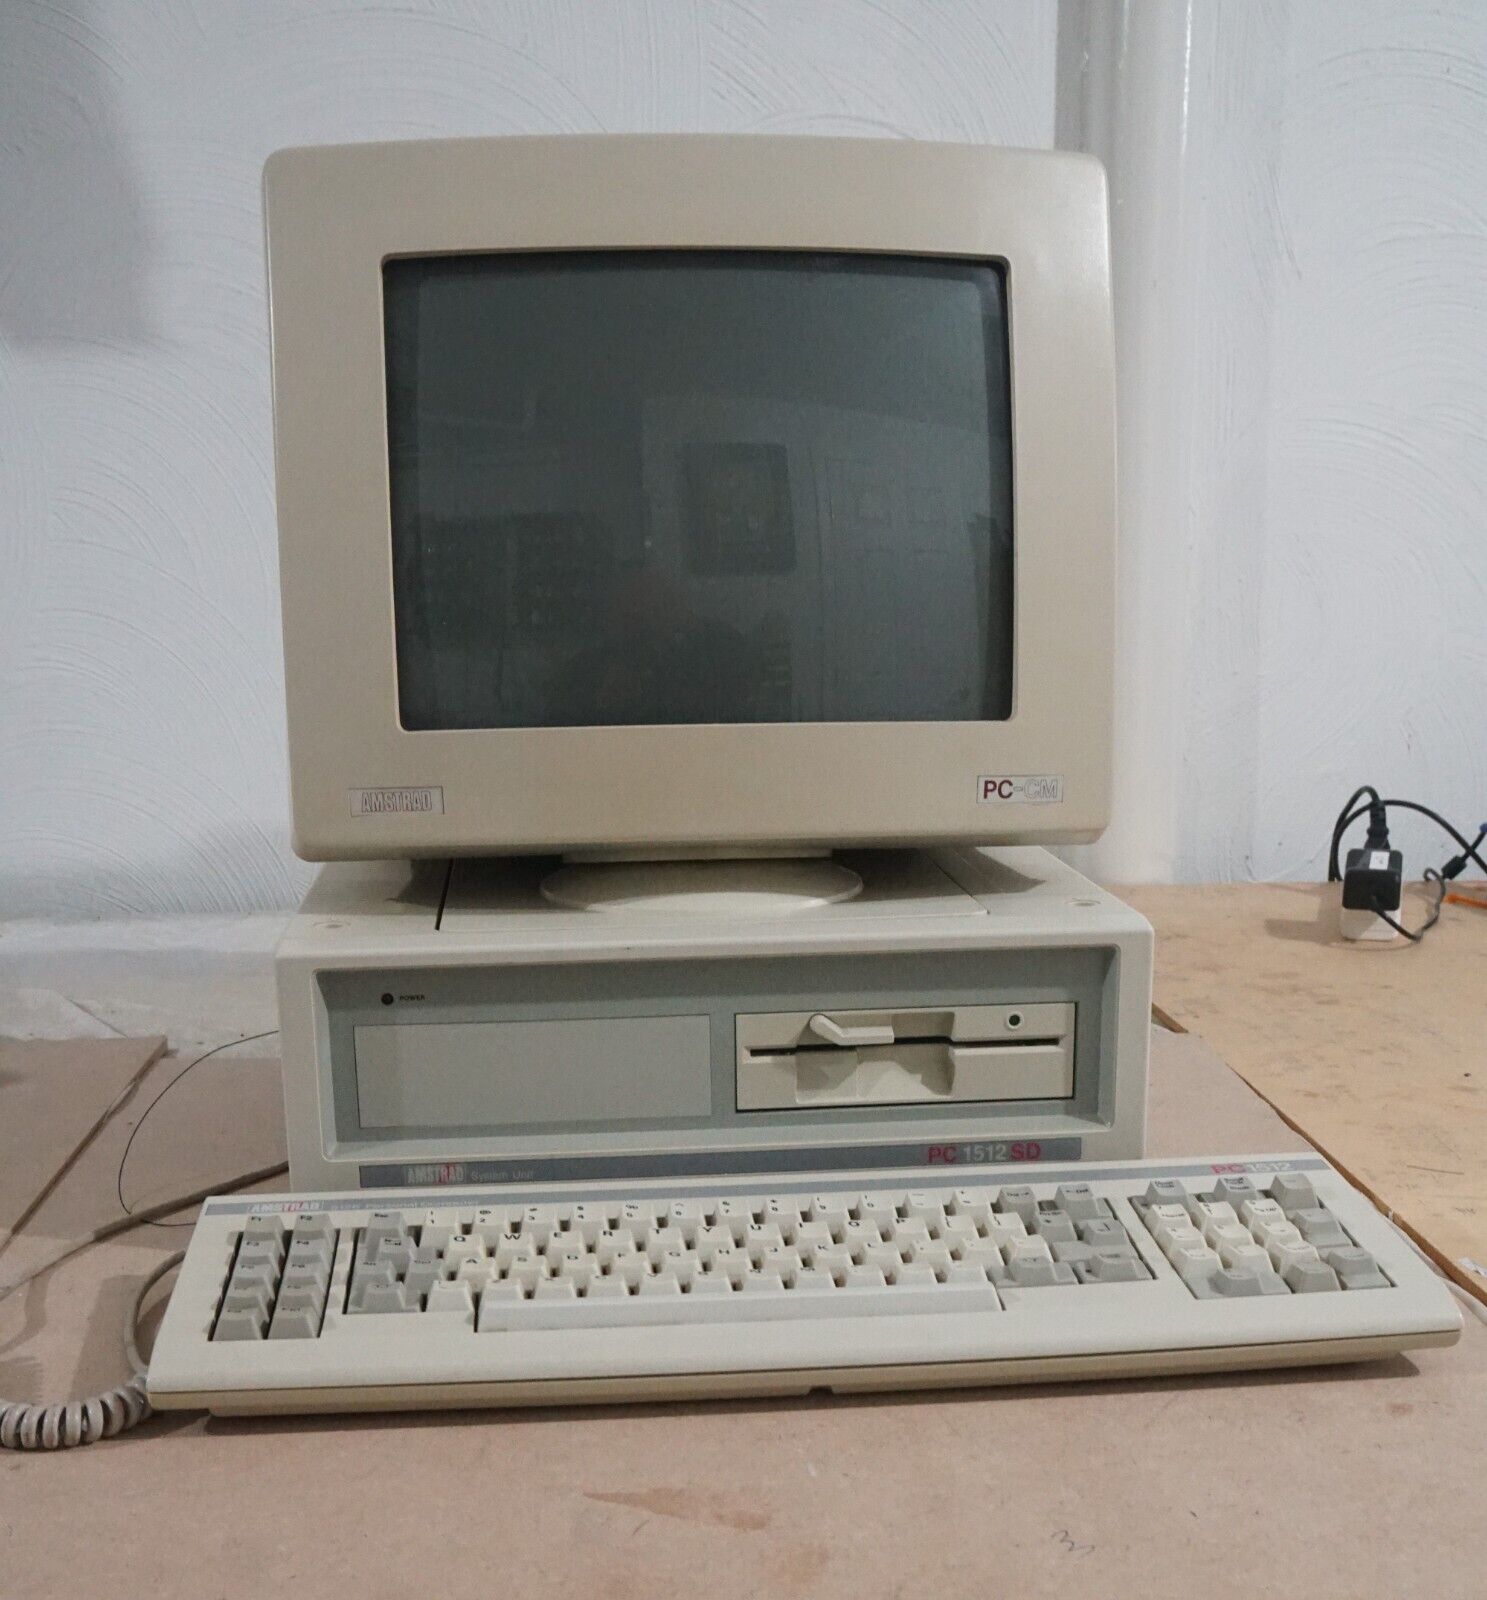 Amstrad PC-1512 Computer with Color Monitor - Collector's Item